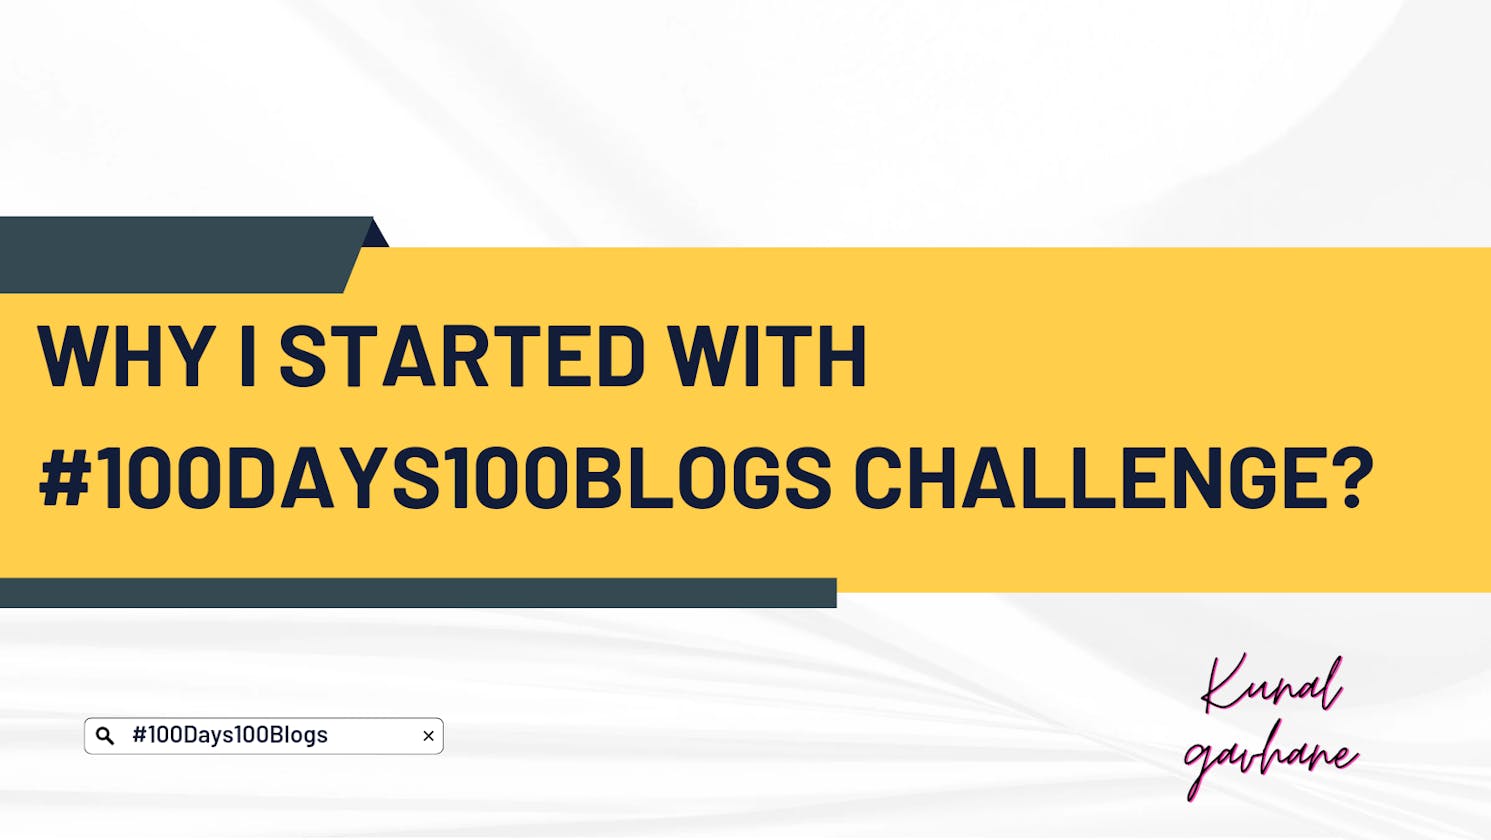 Why I started with #100Days100Blogs challenge?